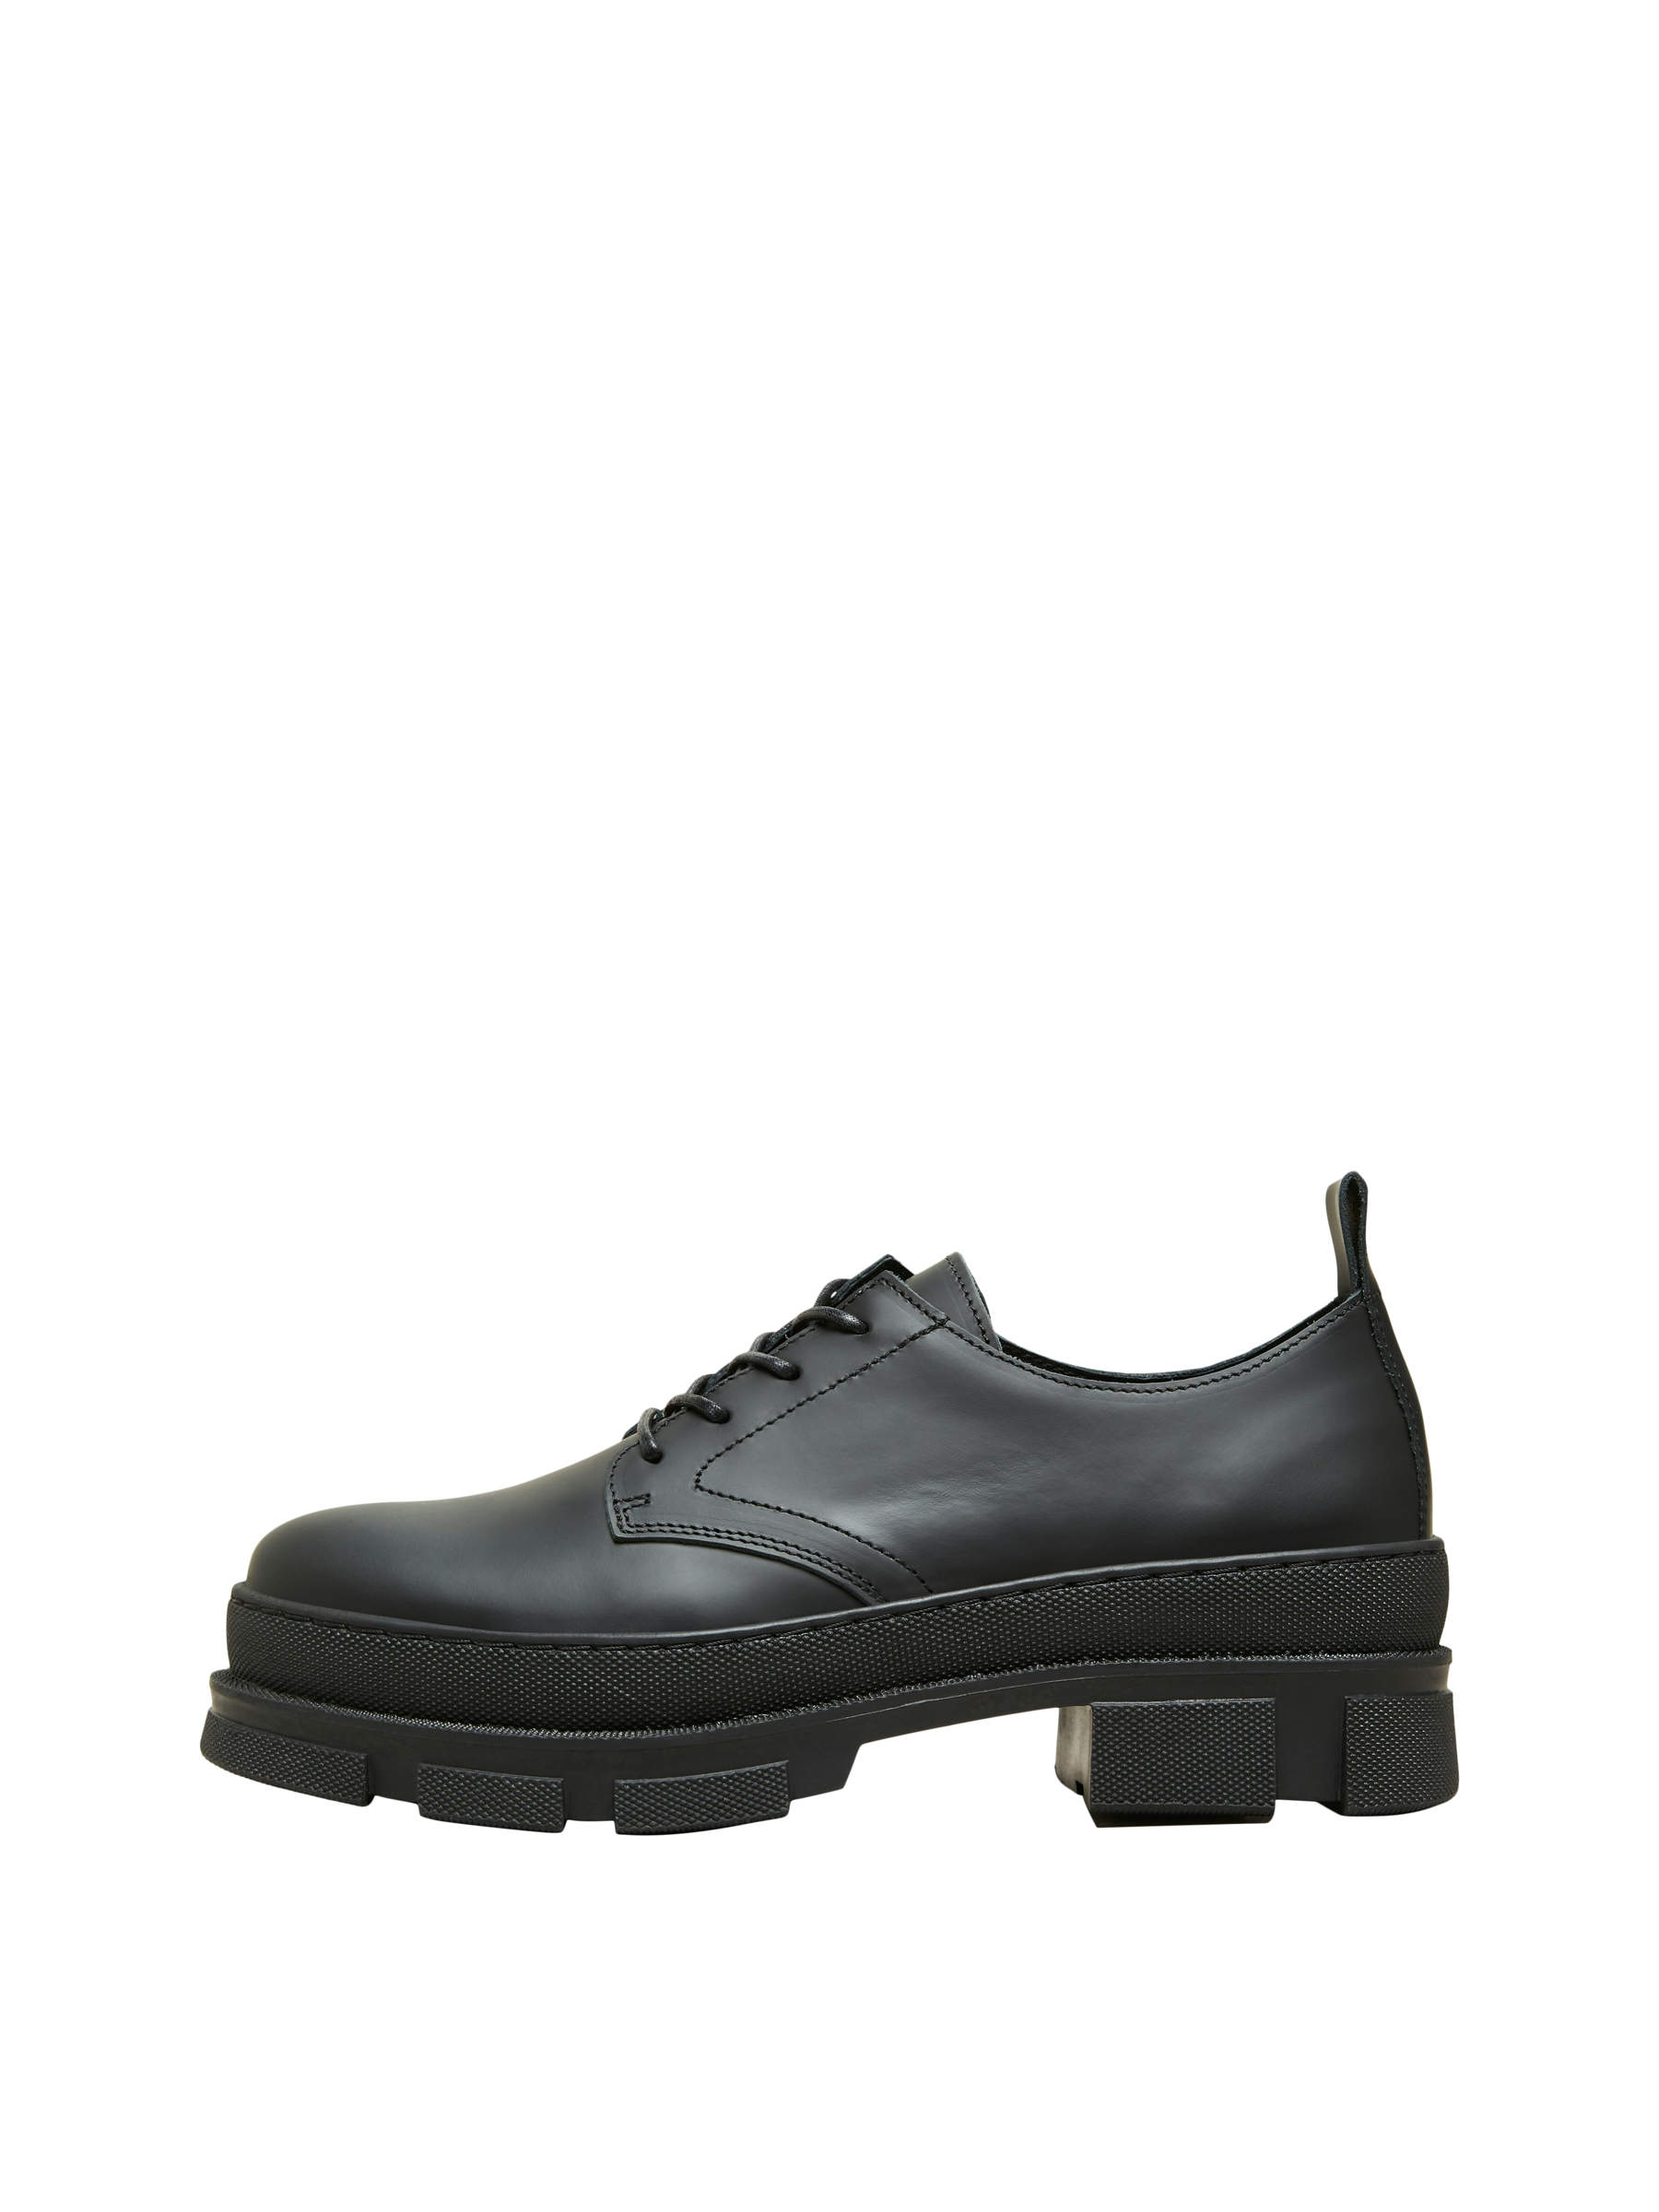 LEATHER DERBY SHOES | Black | SELECTED FEMME®